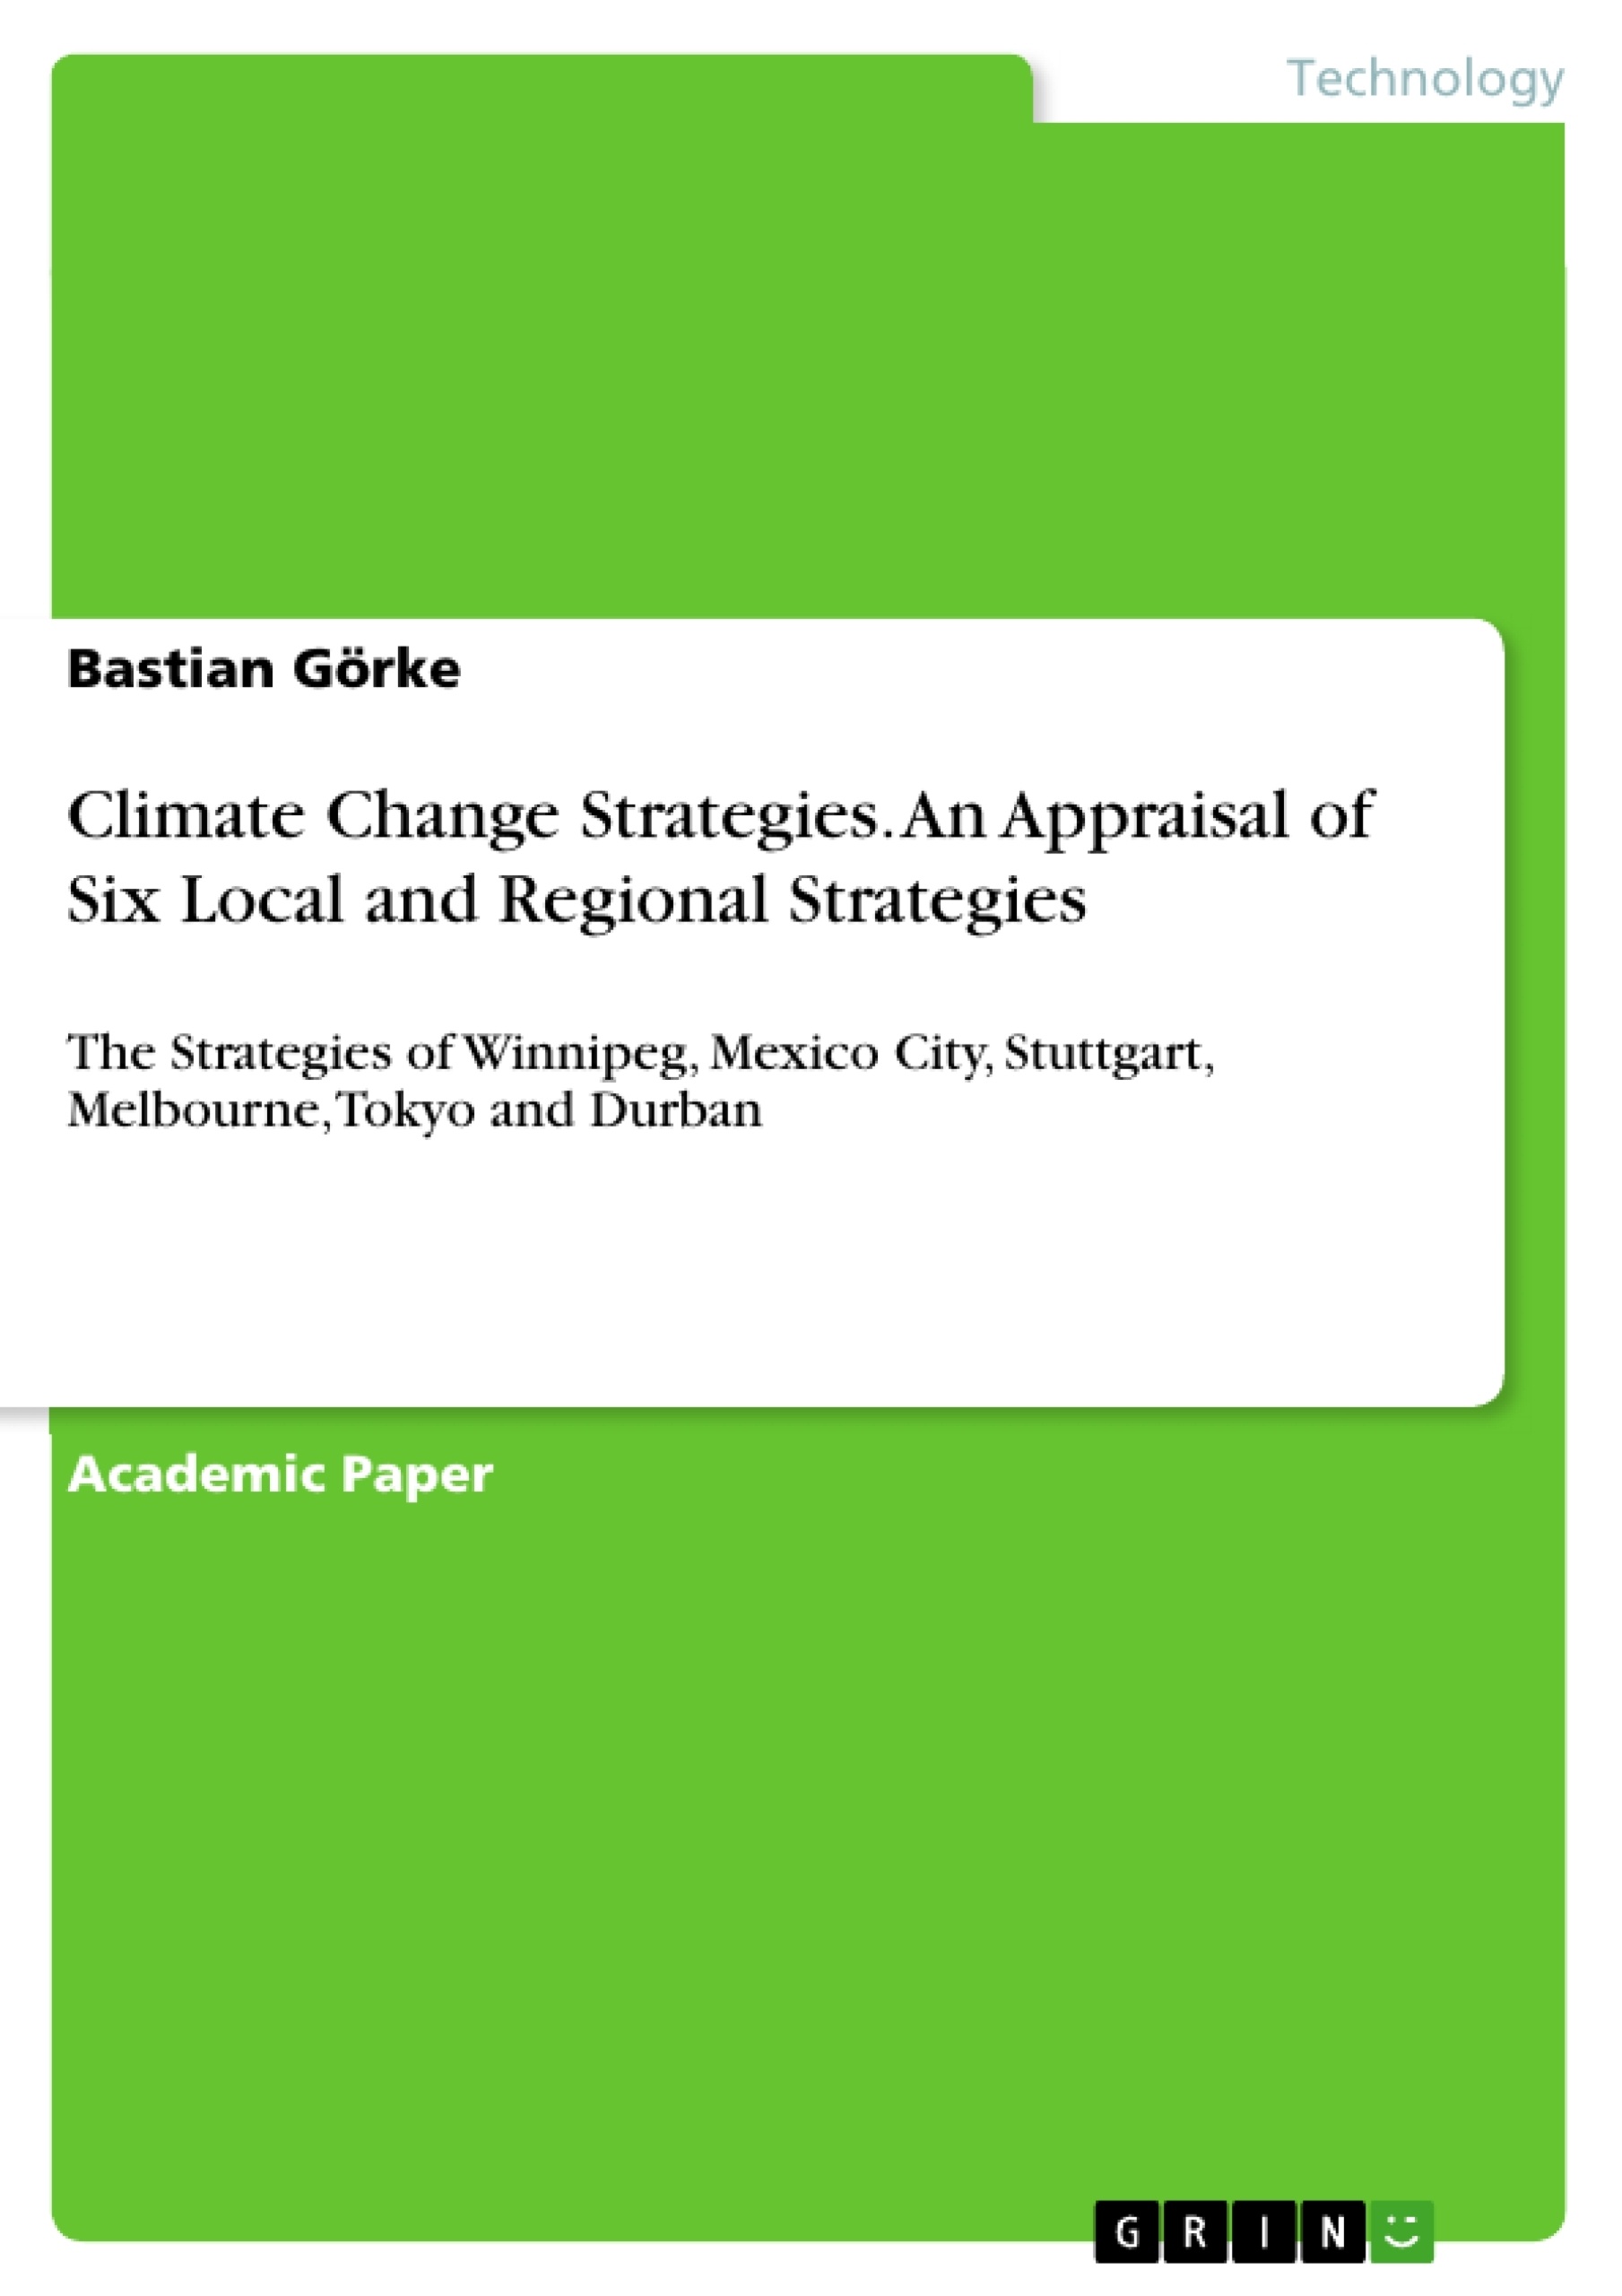 Title: Climate Change Strategies. An Appraisal of Six Local and Regional Strategies